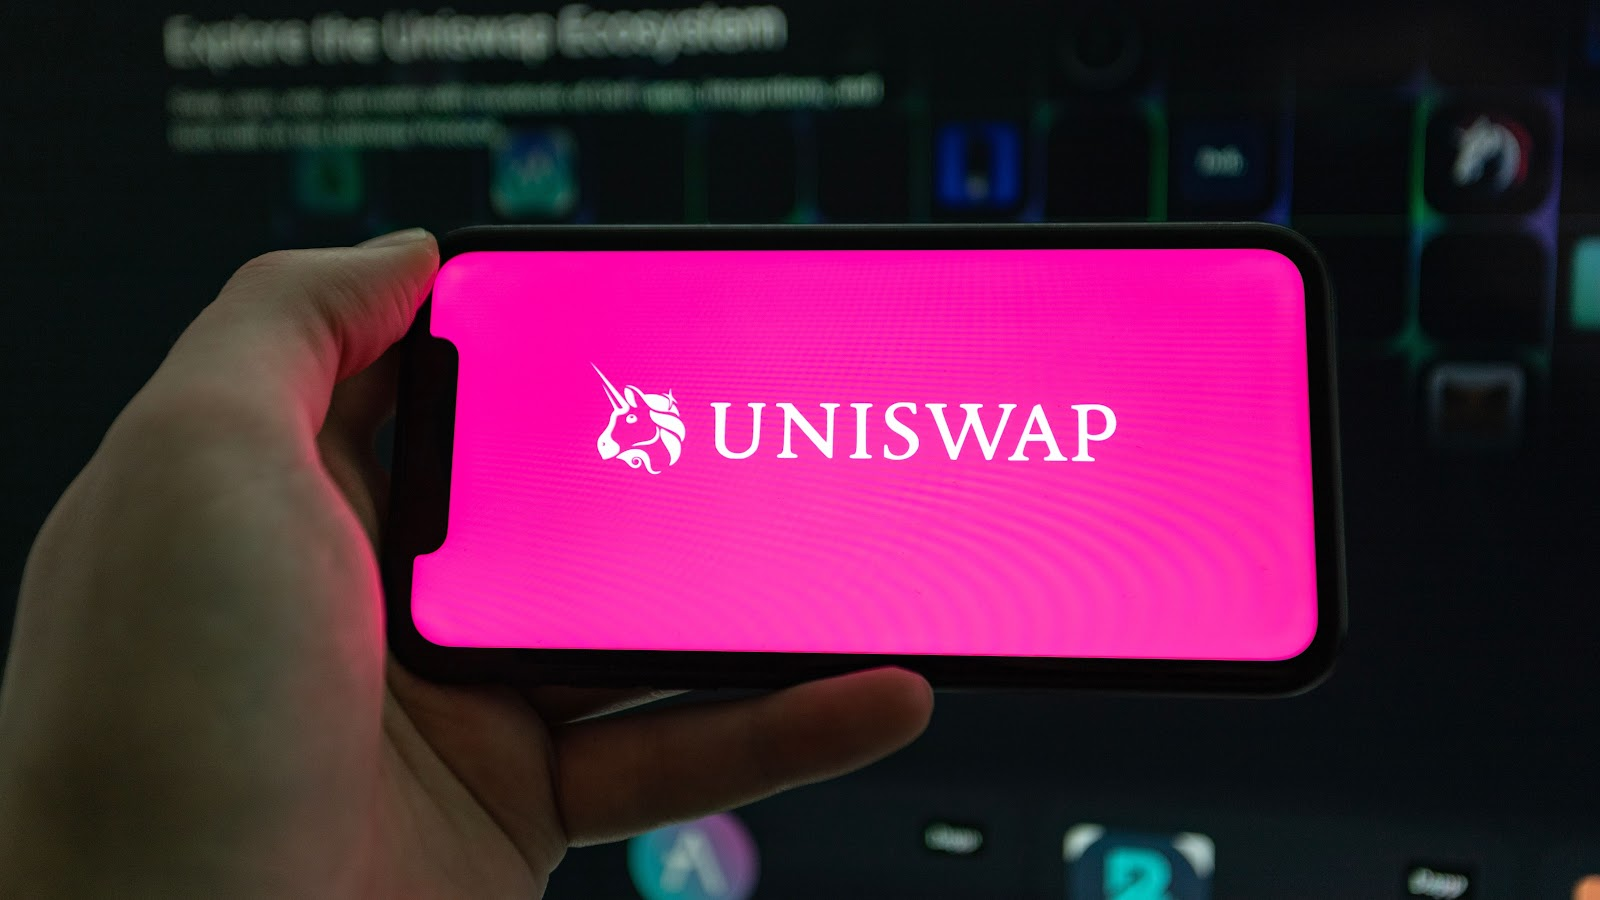 Uniswap (UNI) and Quant (QNT) Move Upwards in Value – Meme Moguls (MGLS) to Lead $6.1B Industry by 2025